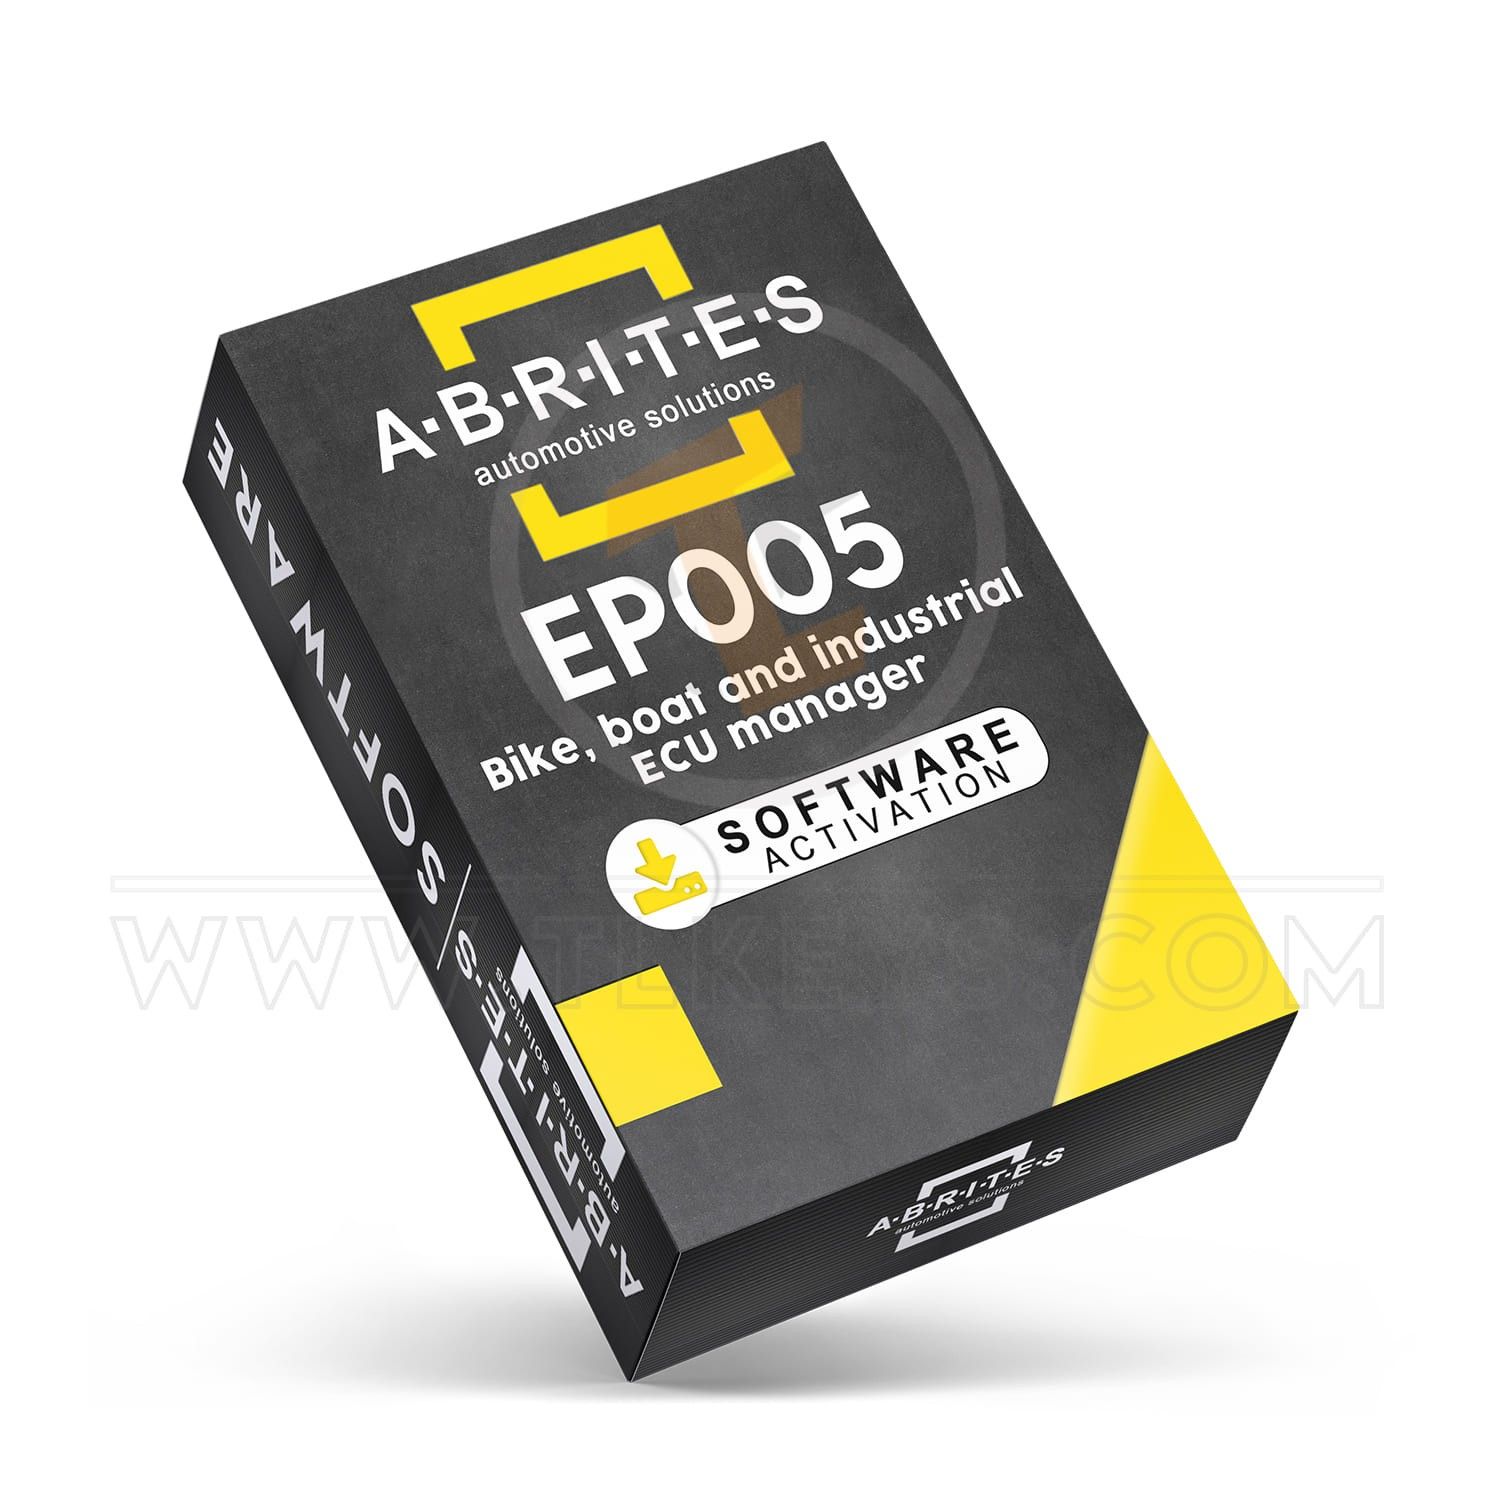 Abrites EP005 - Bike, boat and industrial ECU manager